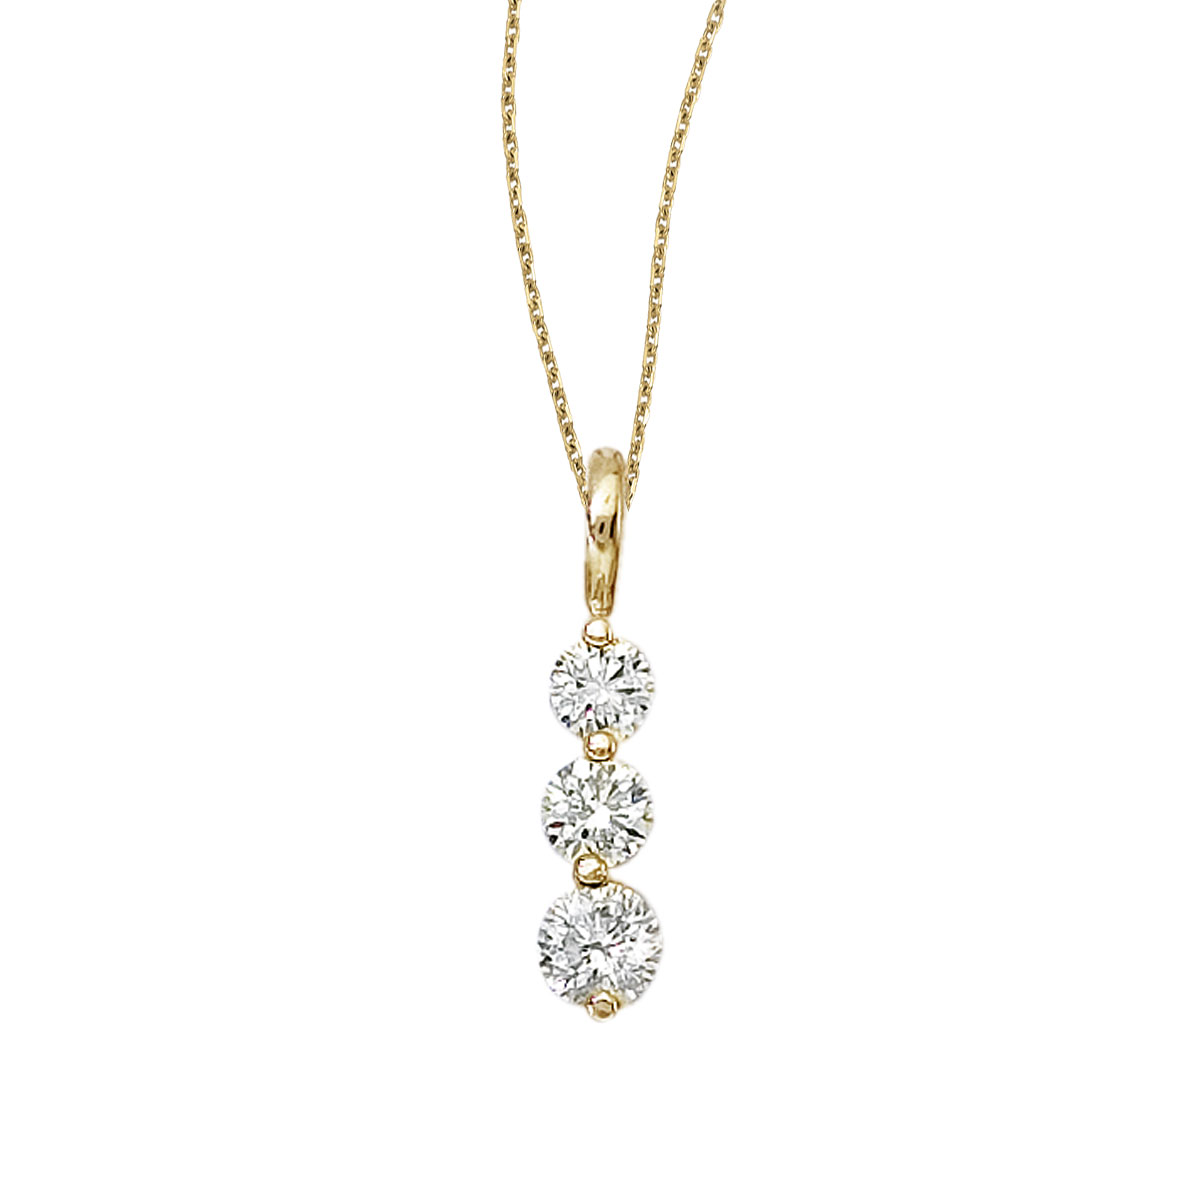 1.00 ct shimmering 3 stone diamond pendant in in 14 yellow gold.